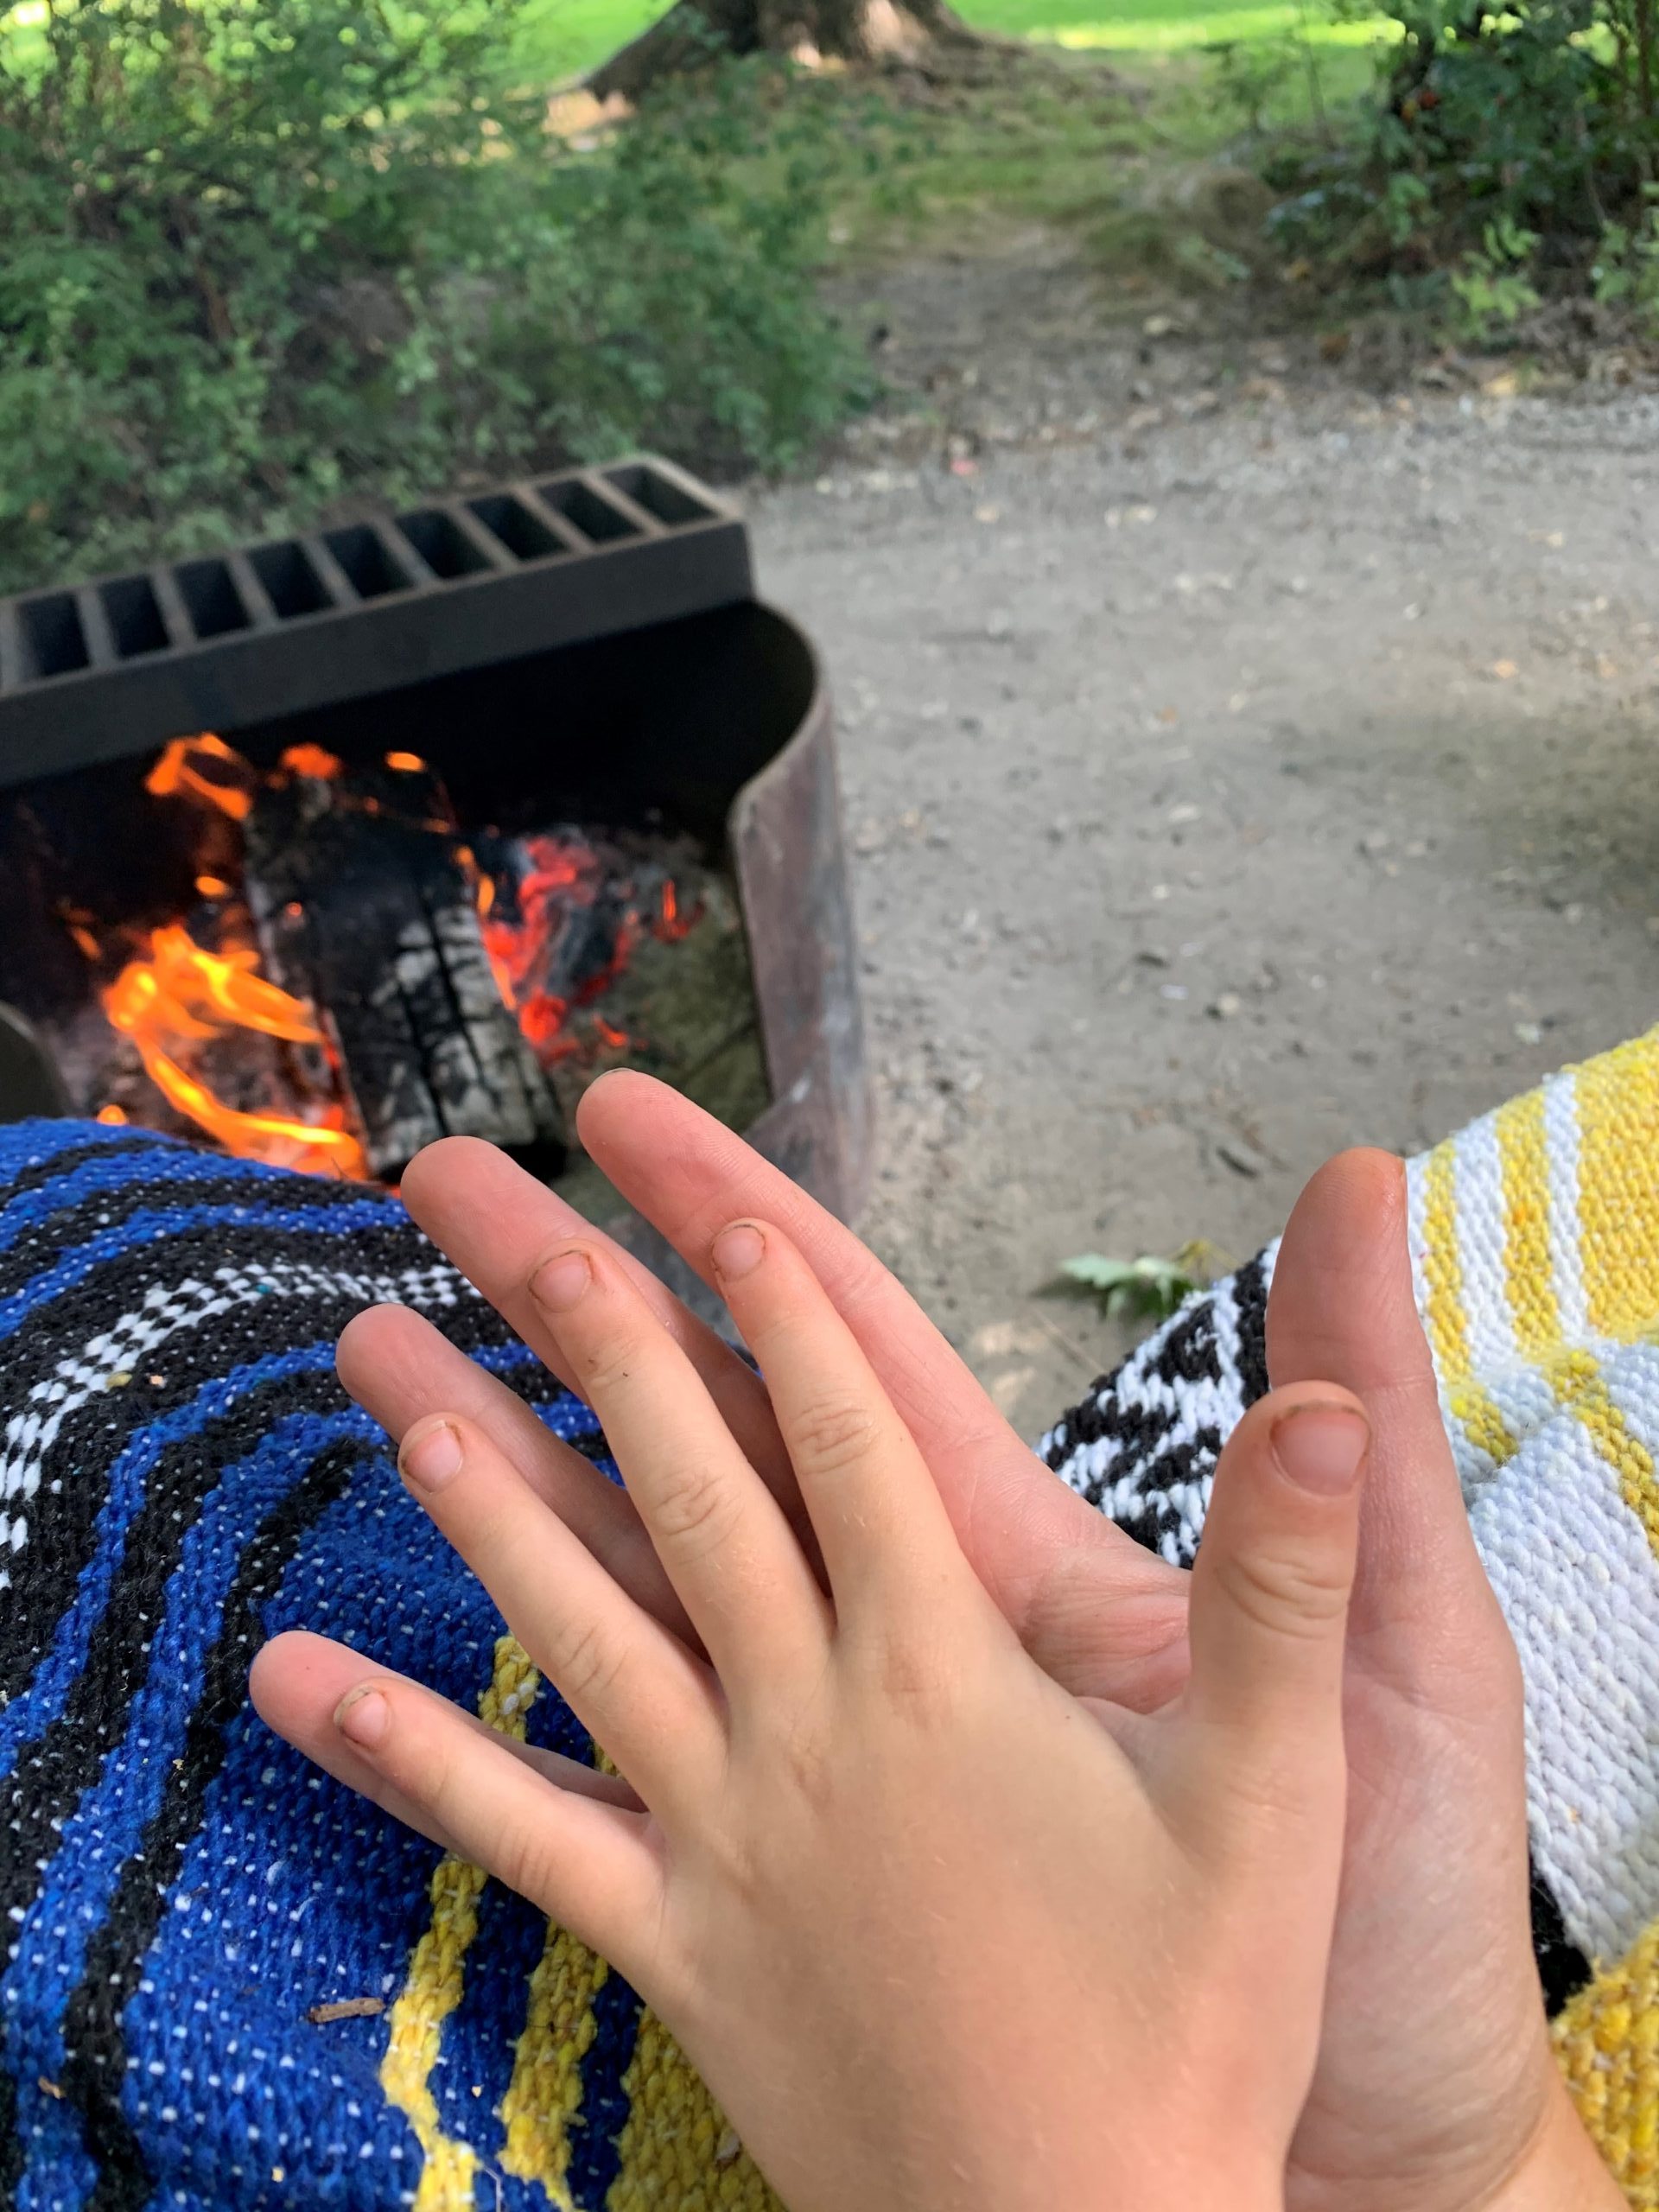 Ten Things I Learned While Camping With My 6 Year Old